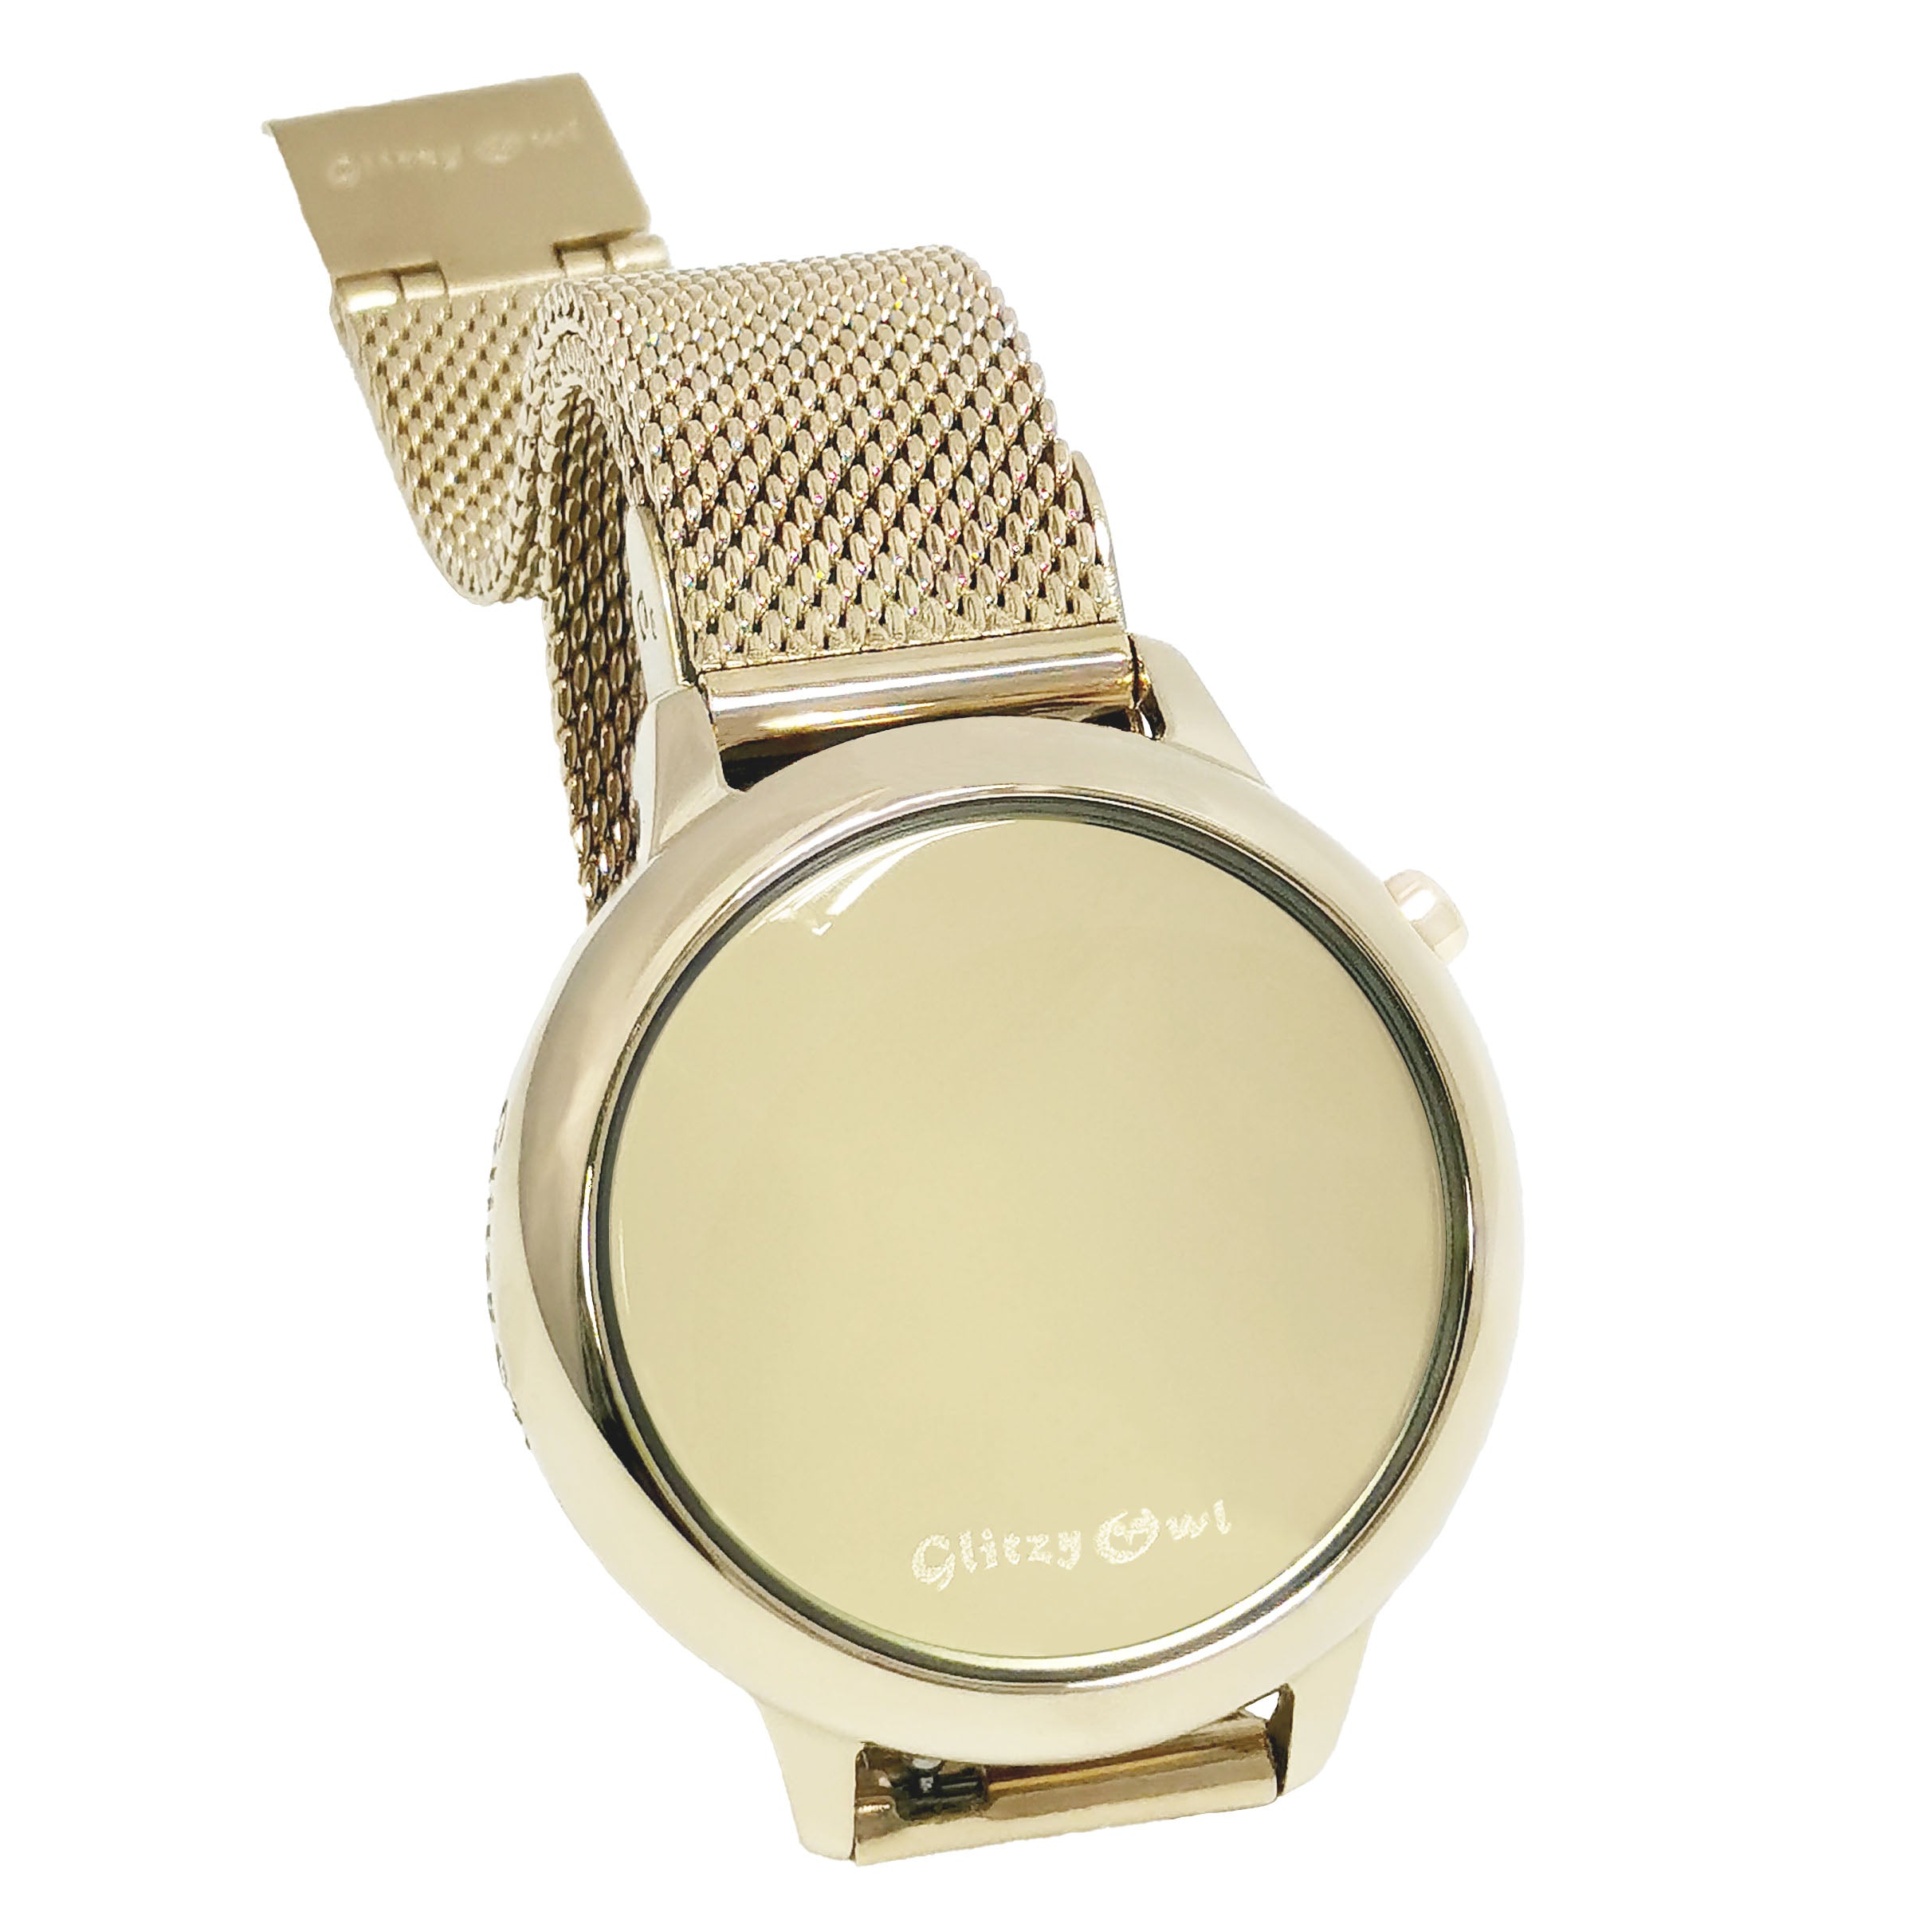 THE BUBBLE LED Gold-Tone Stainless Steel Watch